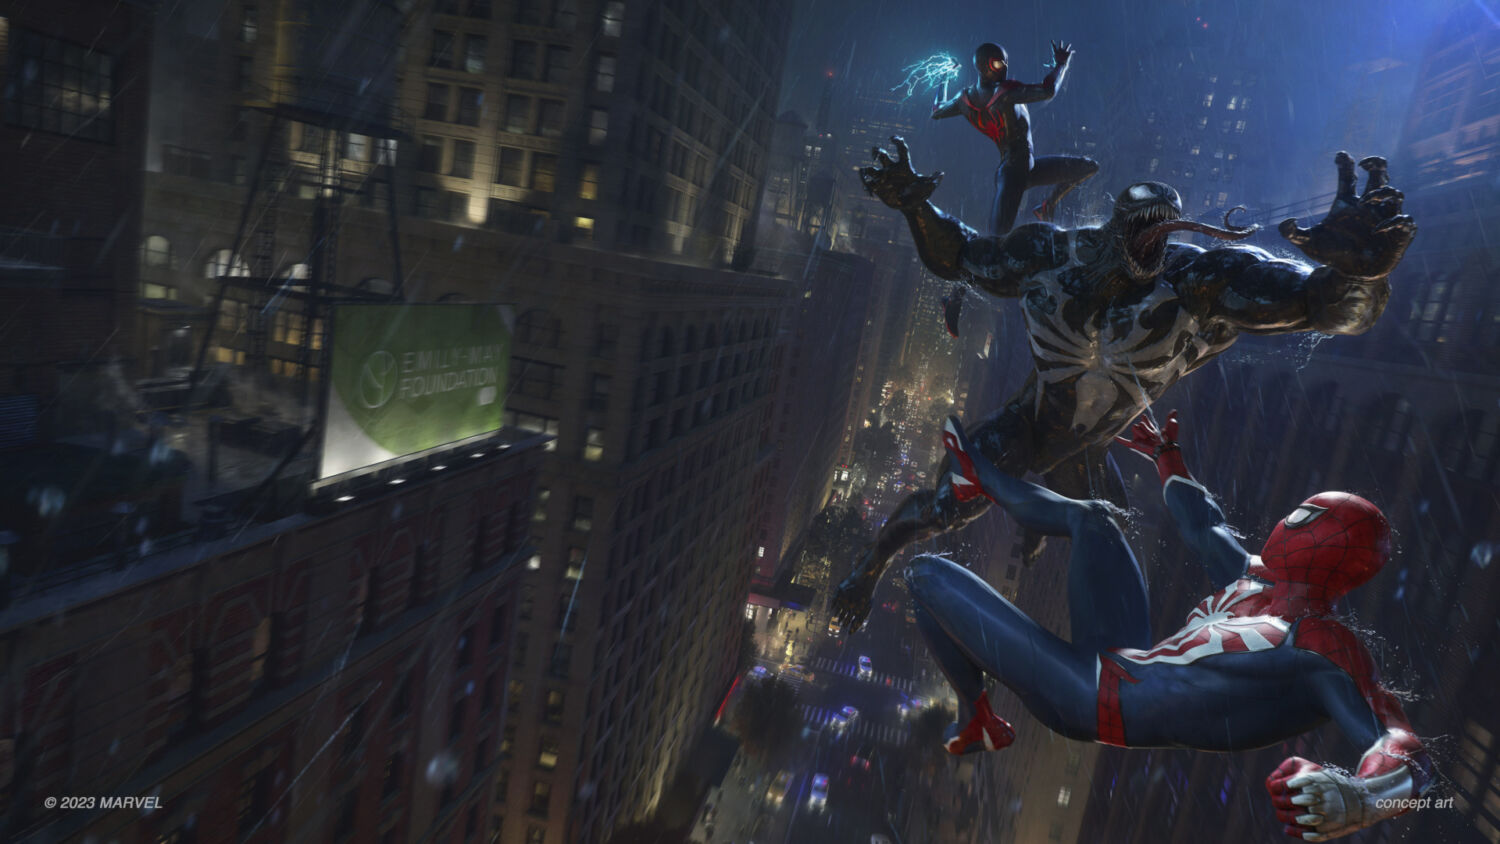 Marvel's Spider-Man 2' Due For PS5 In October, Gives First Look At Venom